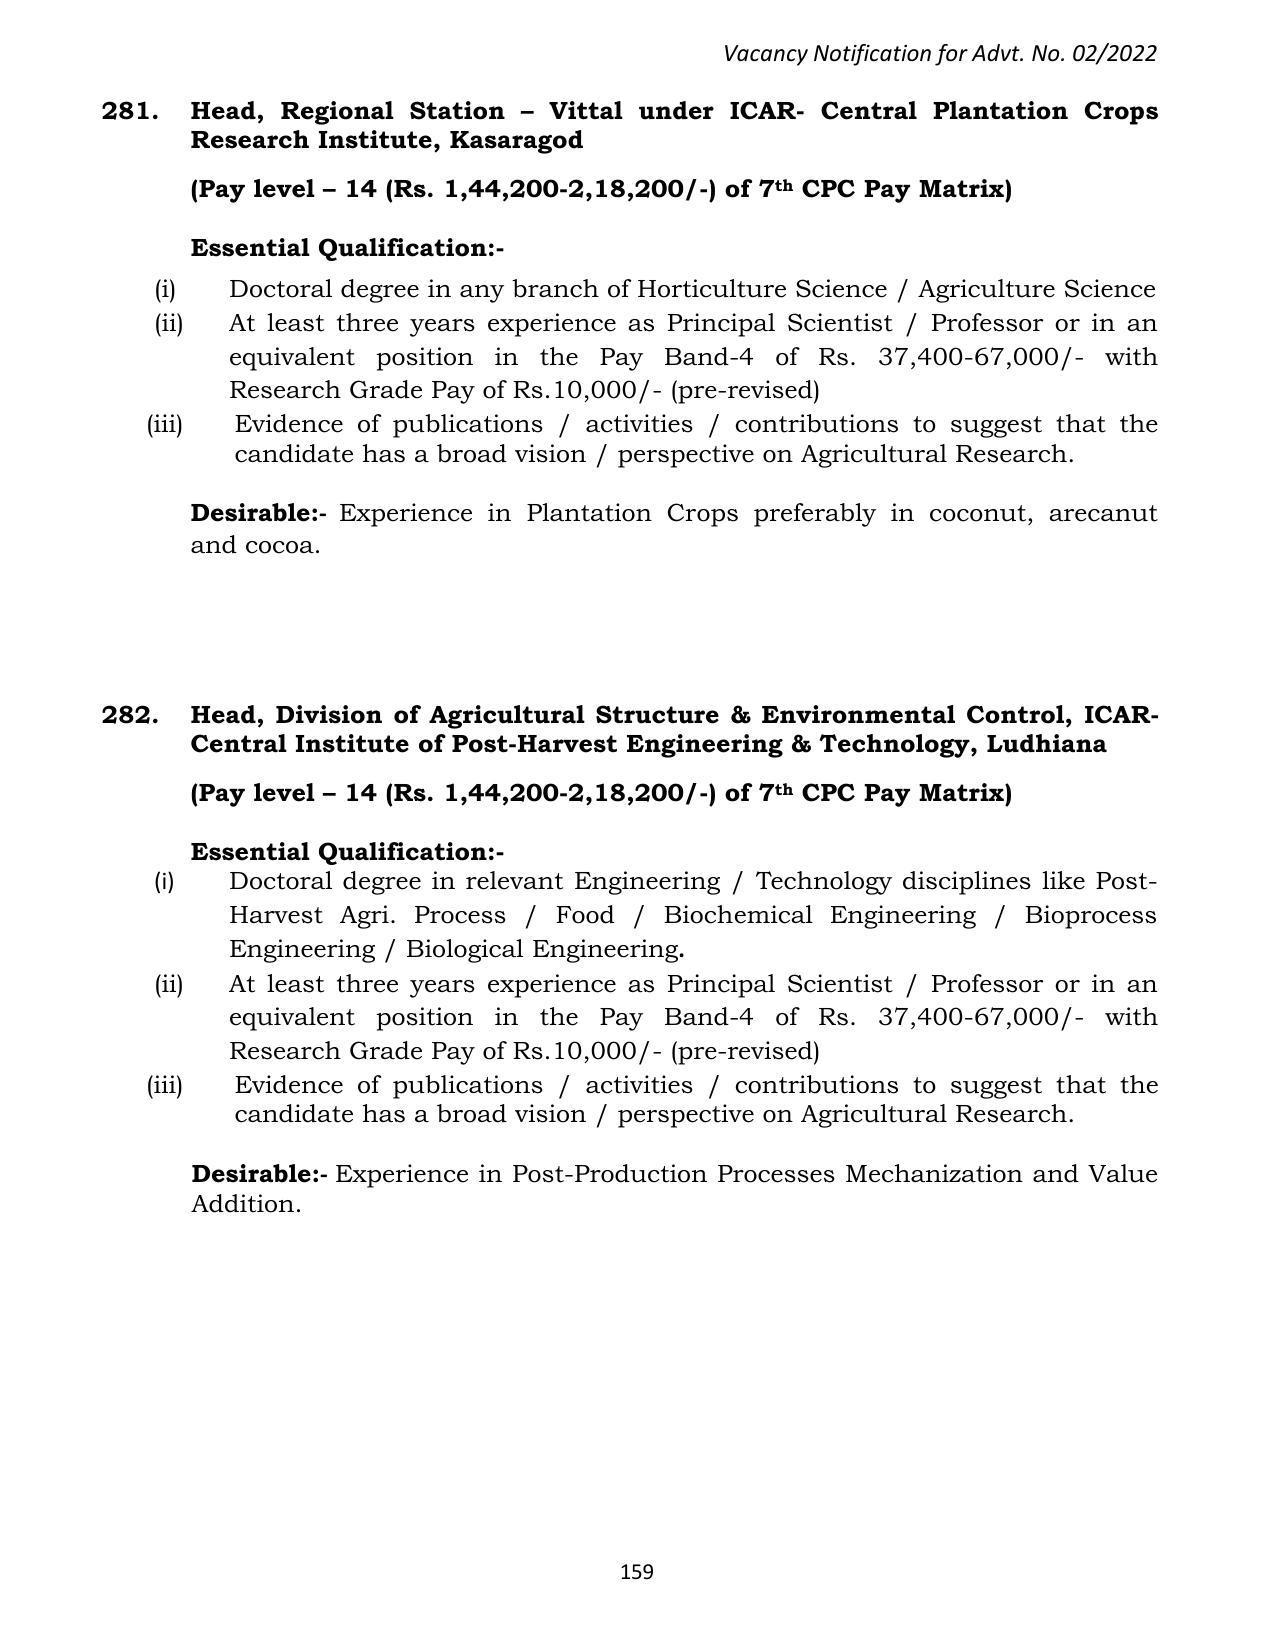 ASRB Non-Research Management Recruitment 2022 - Page 156